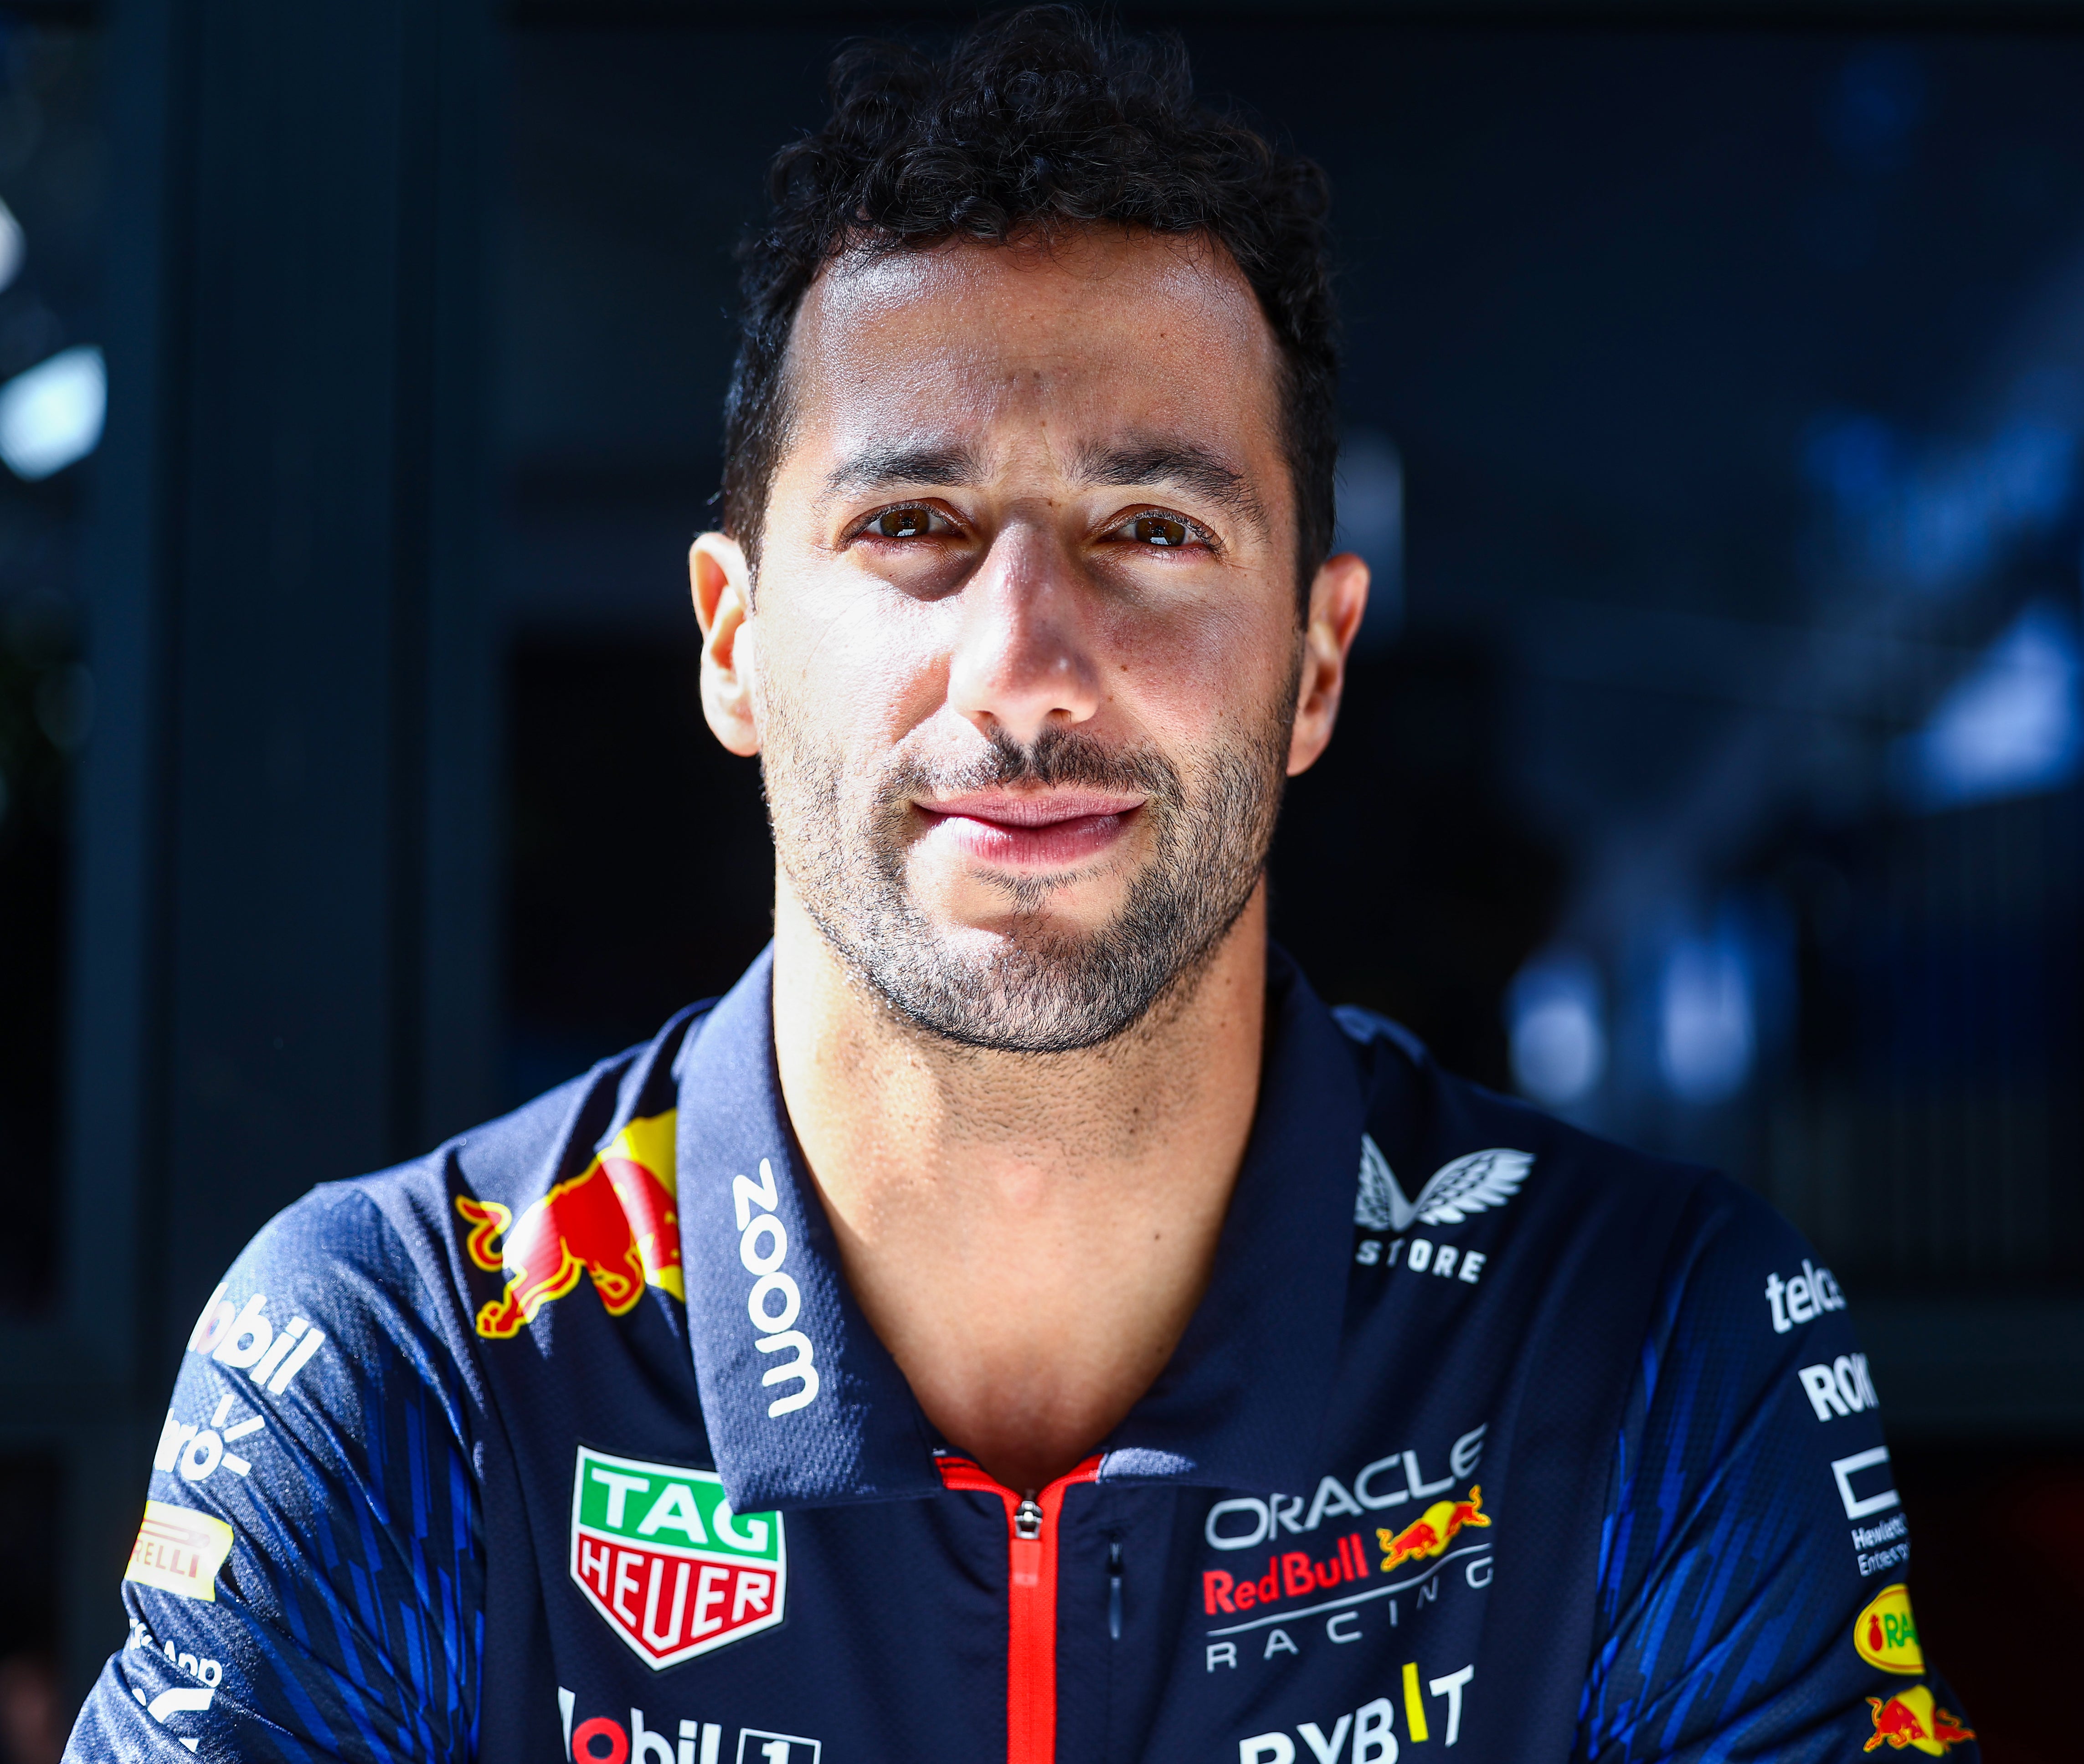 Daniel Ricciardo is back - and this time he wants to go out on top ...